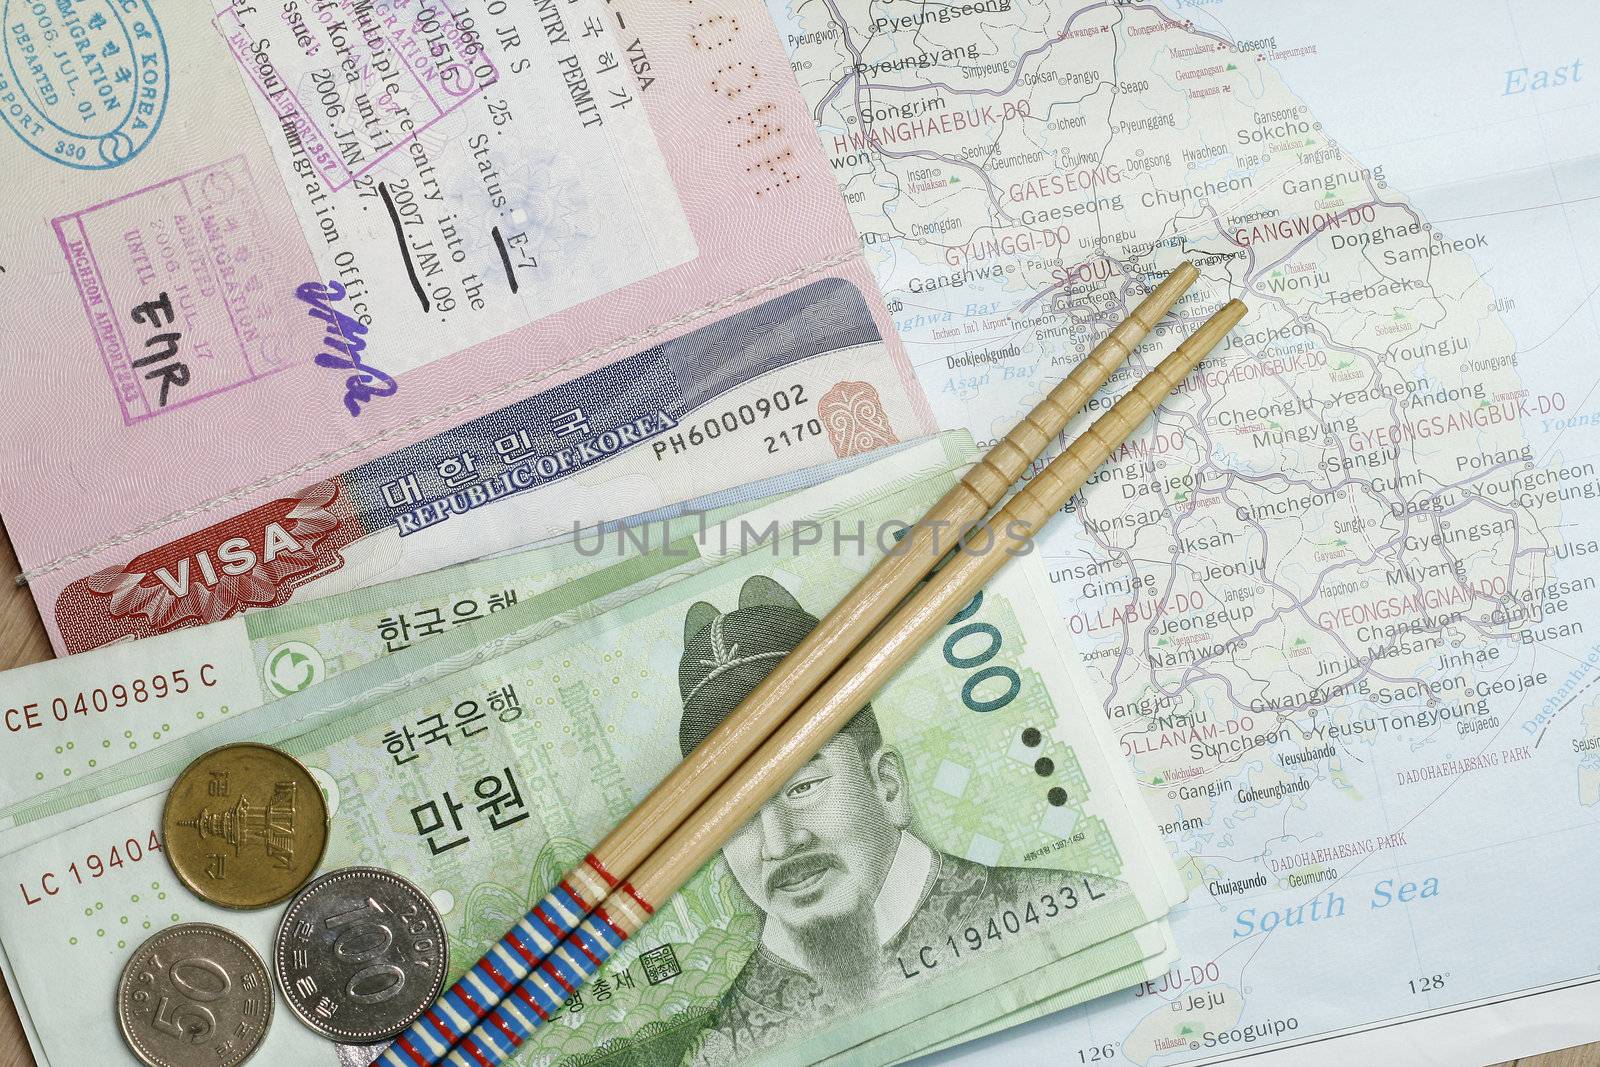 All about South Korea concept - with map, chopstick and korean visa